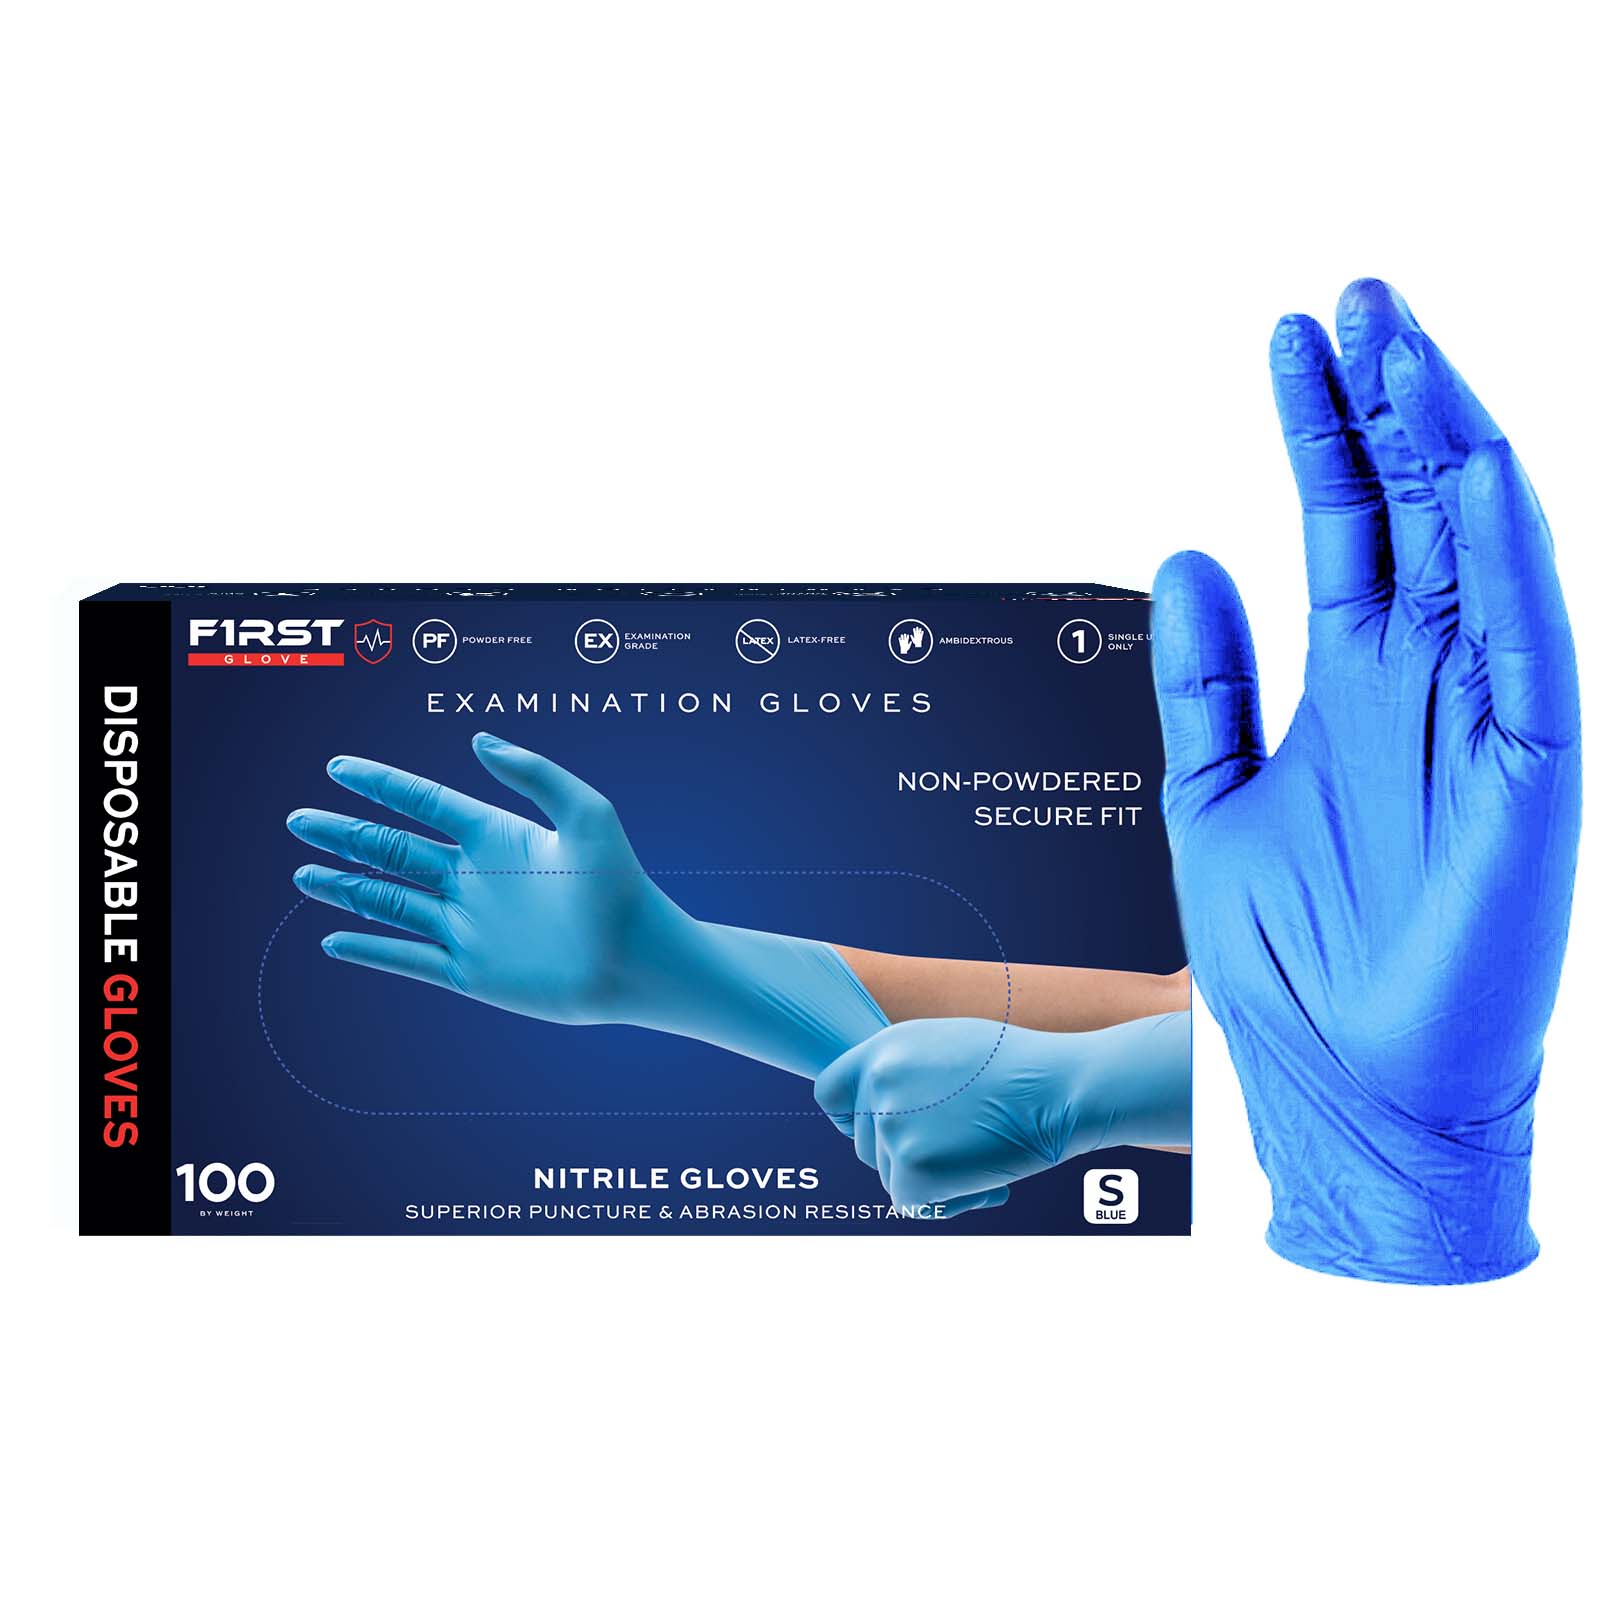 Case of 10 Boxes-First Glove Nitrile Exam Ex-Large Powder Free Gloves 100 